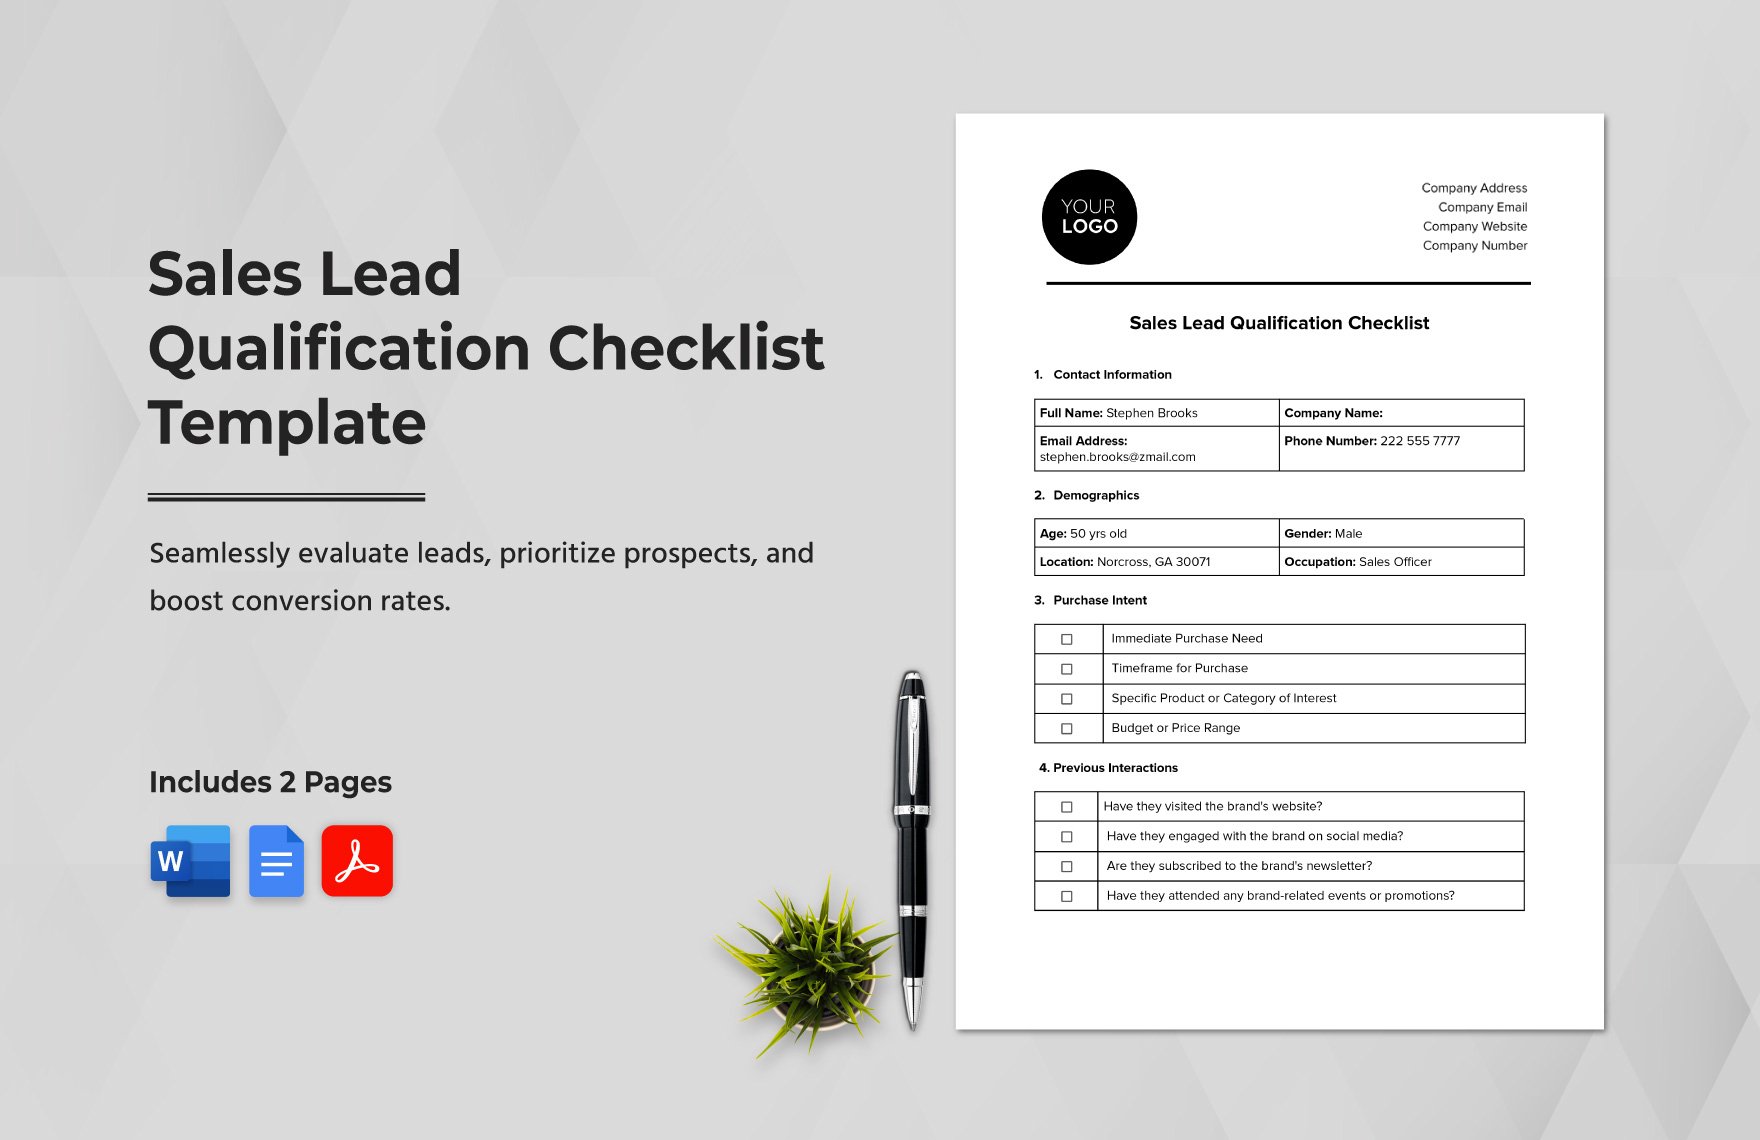 Sales Lead Qualification Checklist Template in Word, Google Docs, PDF